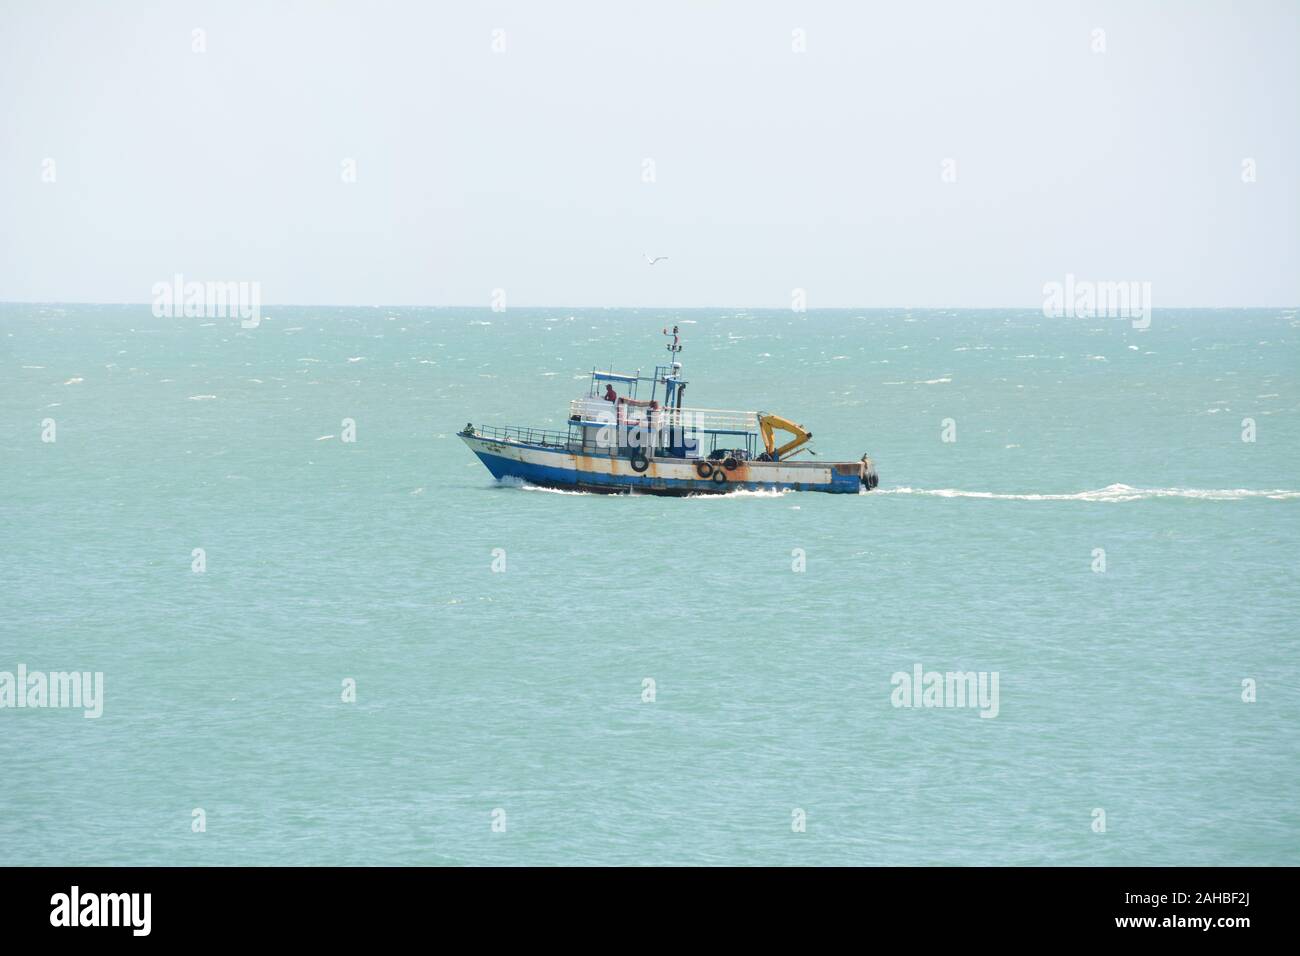 A small Tunisian commercial fishing boat heads out to sea from the city of Mahdia on the Mediterranean coast of Tunisia. Stock Photo